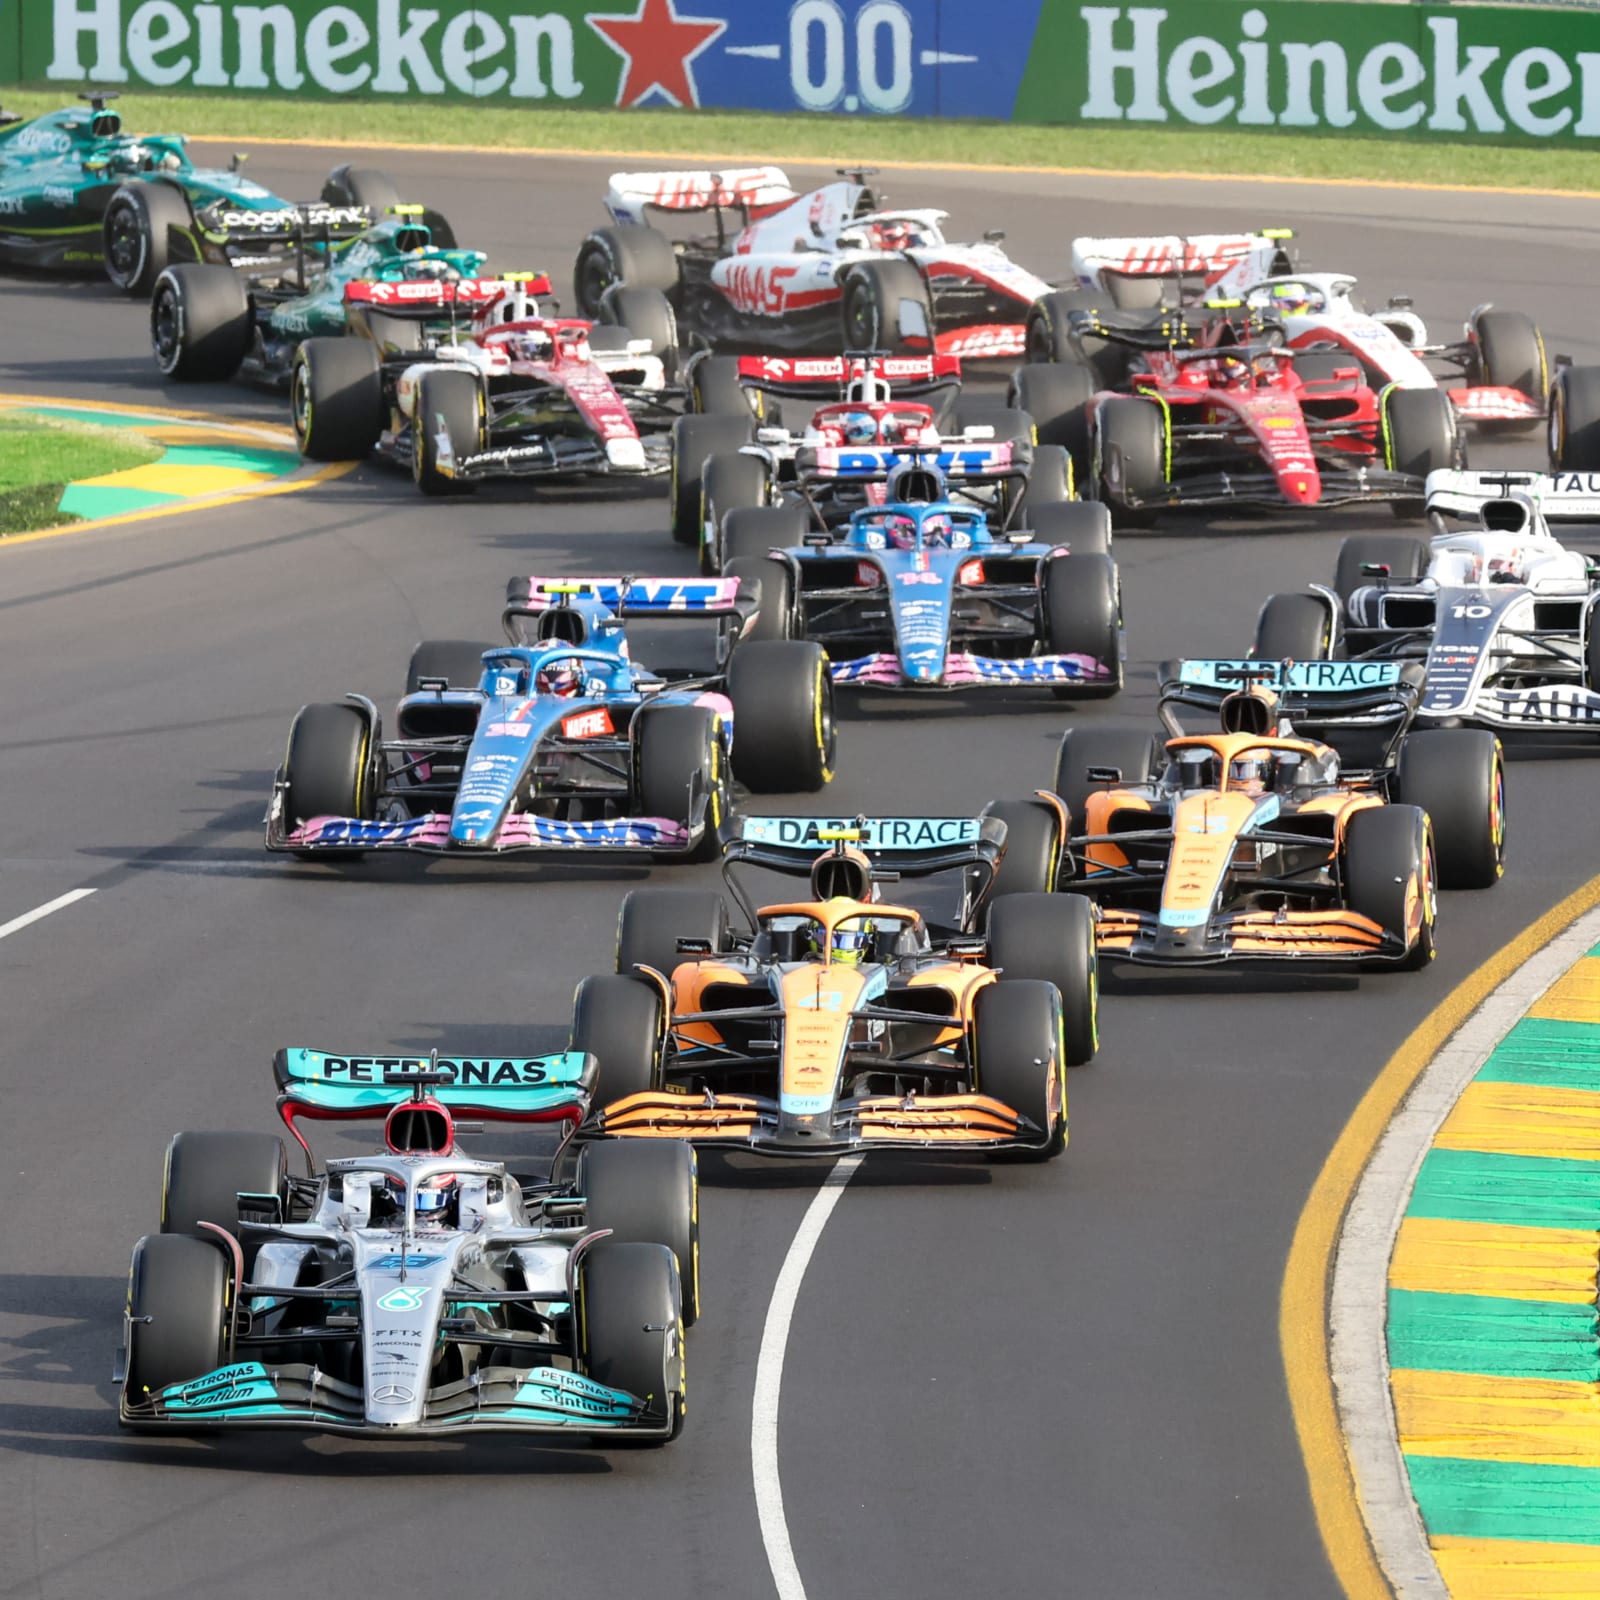 British Grand Prix at Silverstone voted best Formula One race in 2022  season - Northants Live